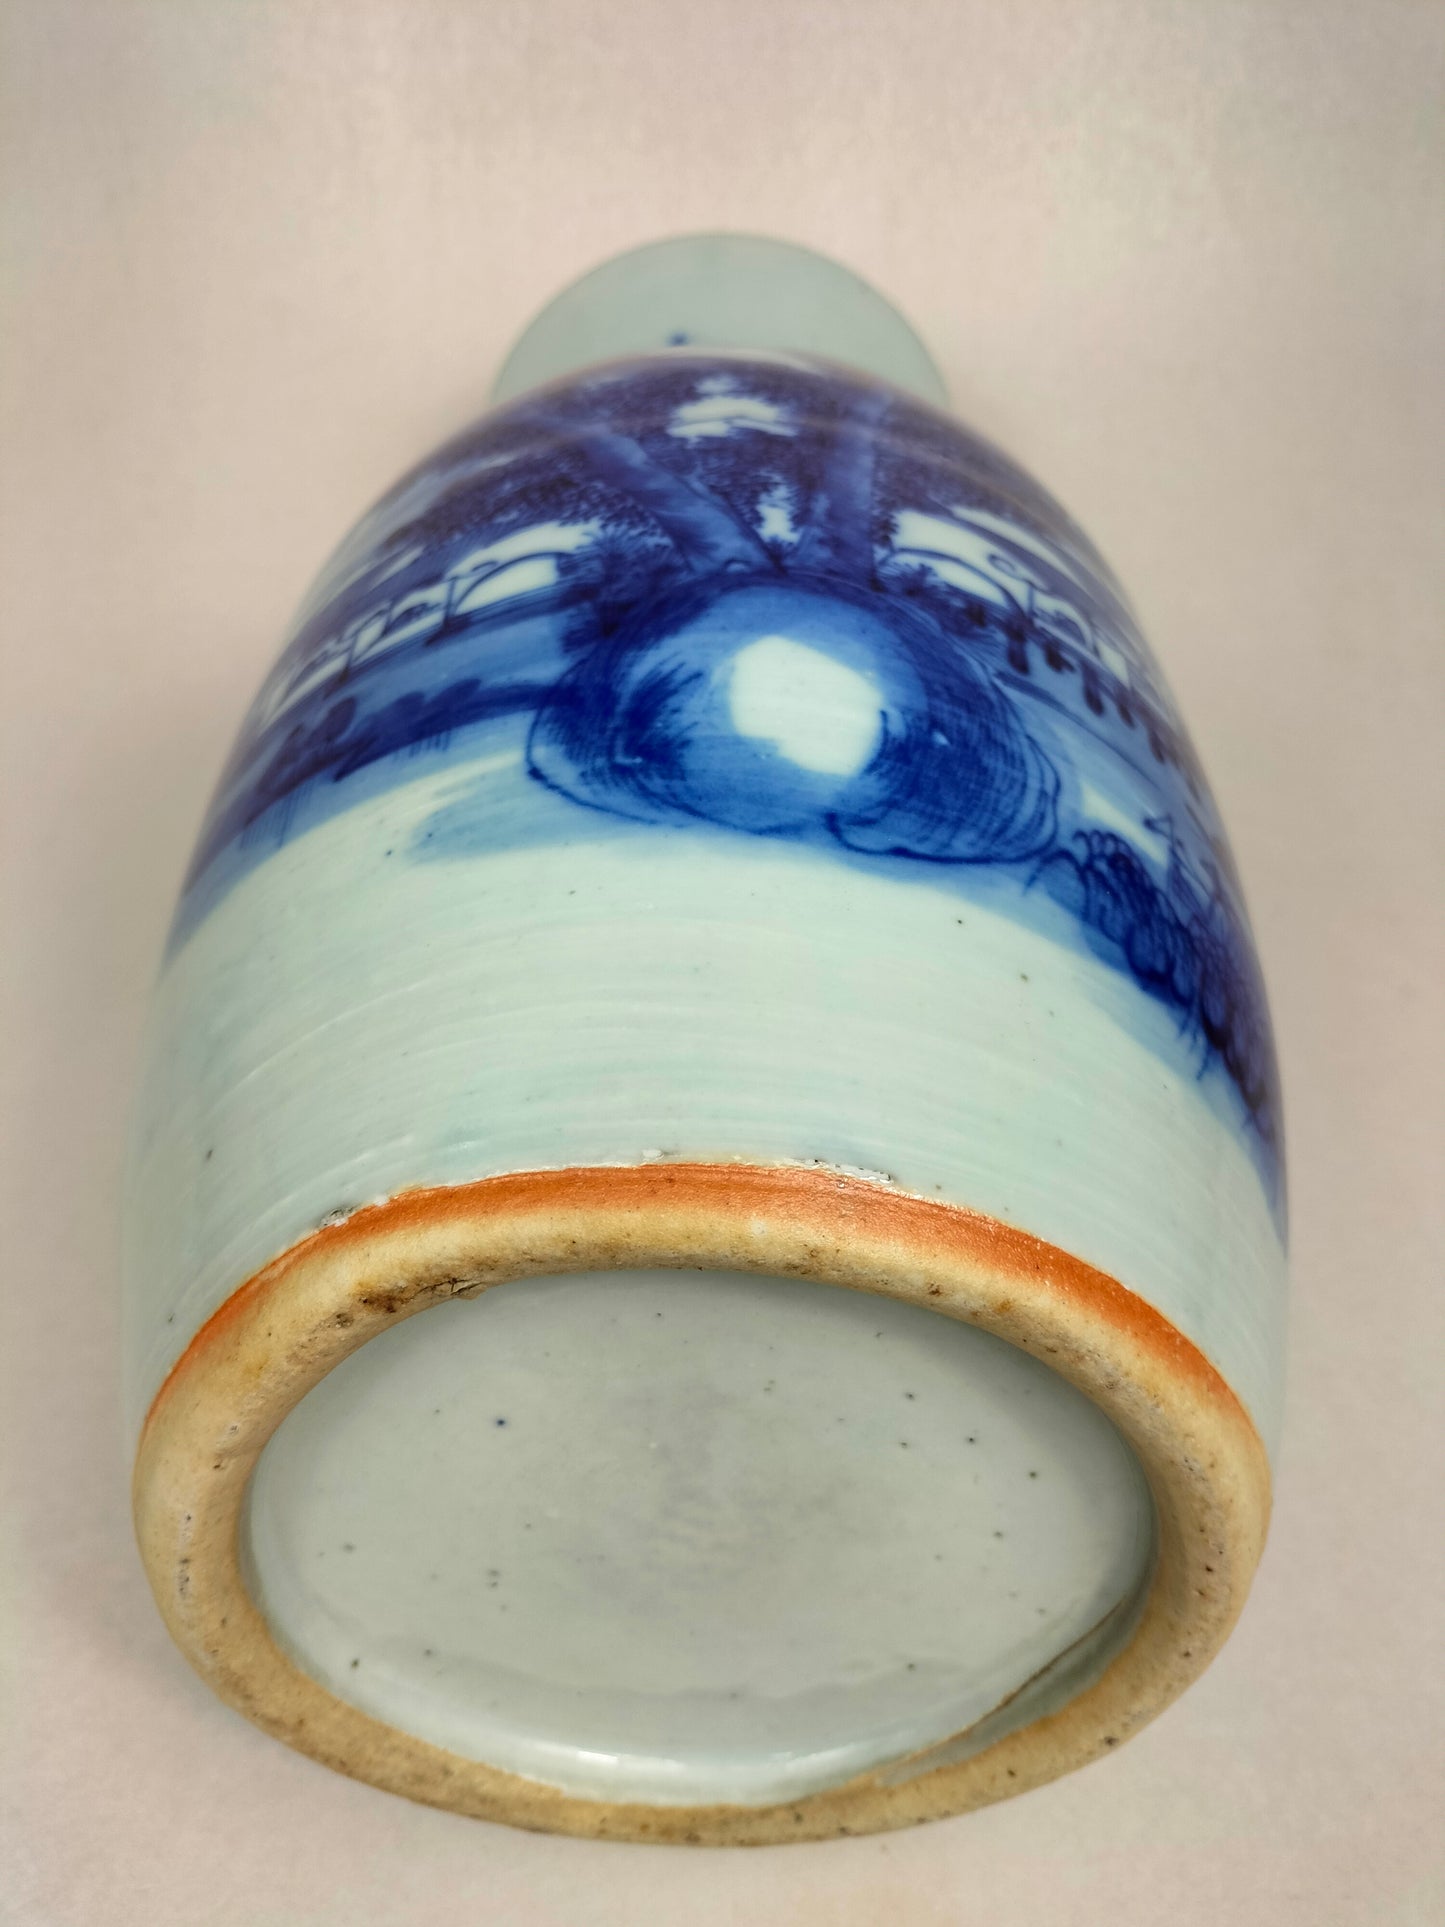 Antique Chinese vase decorated with a landscape // Blue and white - Qing Dynasty - 19th century